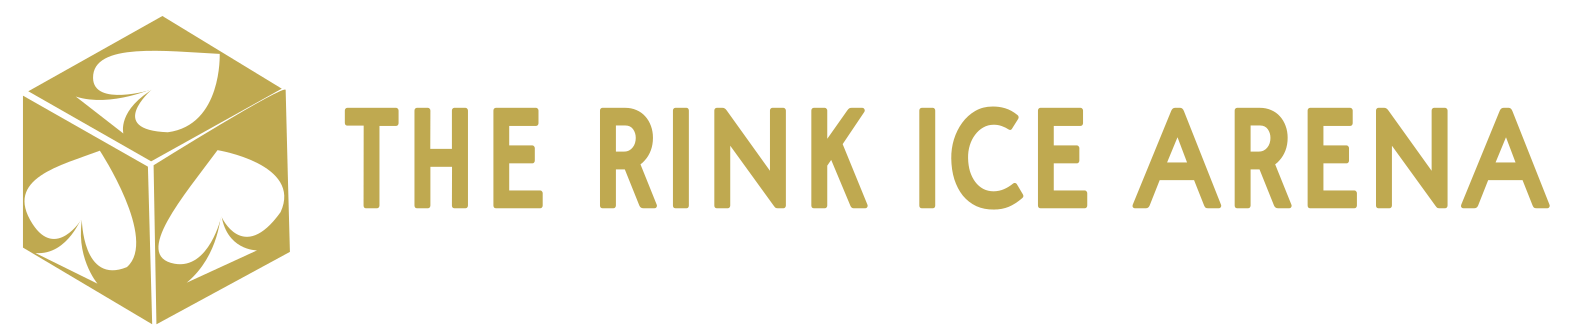 The Rink Ice Arena logo